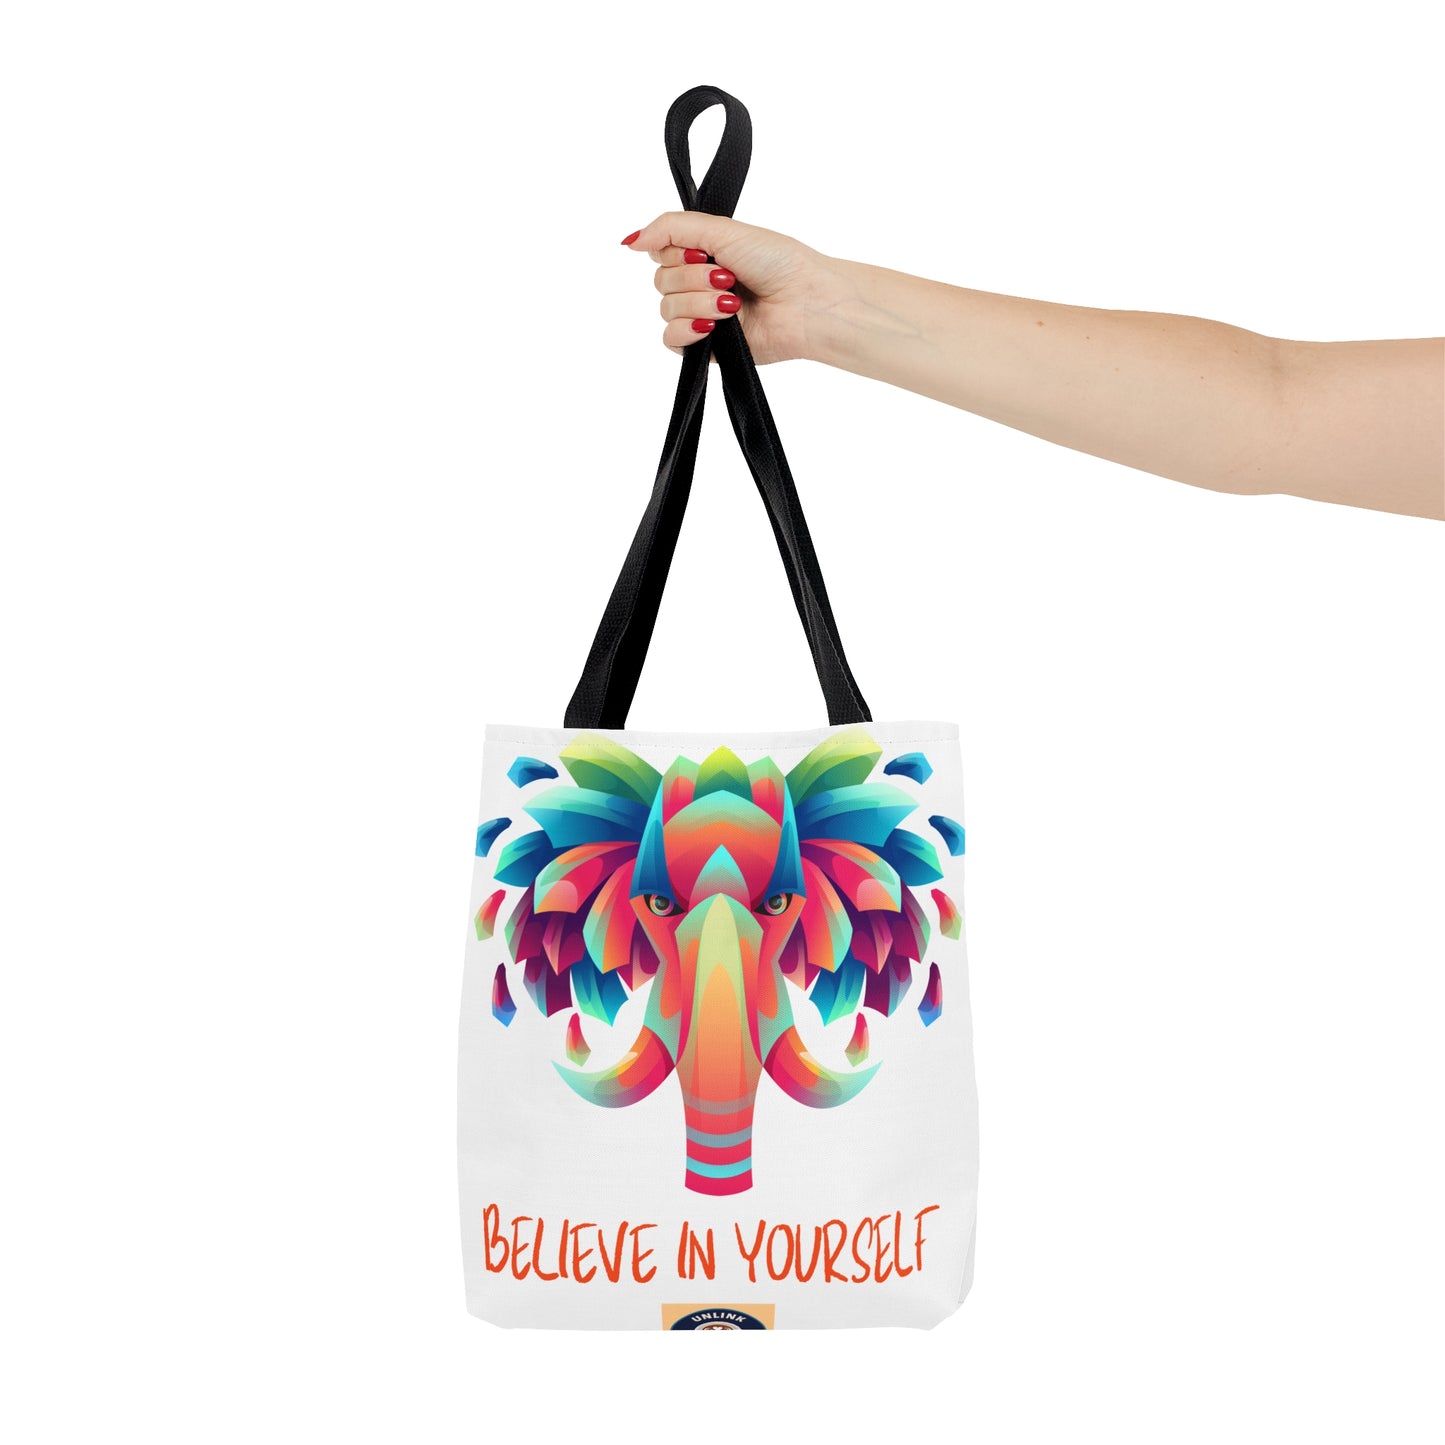 Gorgeous elephant design above “BELIEVE IN YOURSELF” affirmation tote bag. Come in 3 sizes to meet your needs.